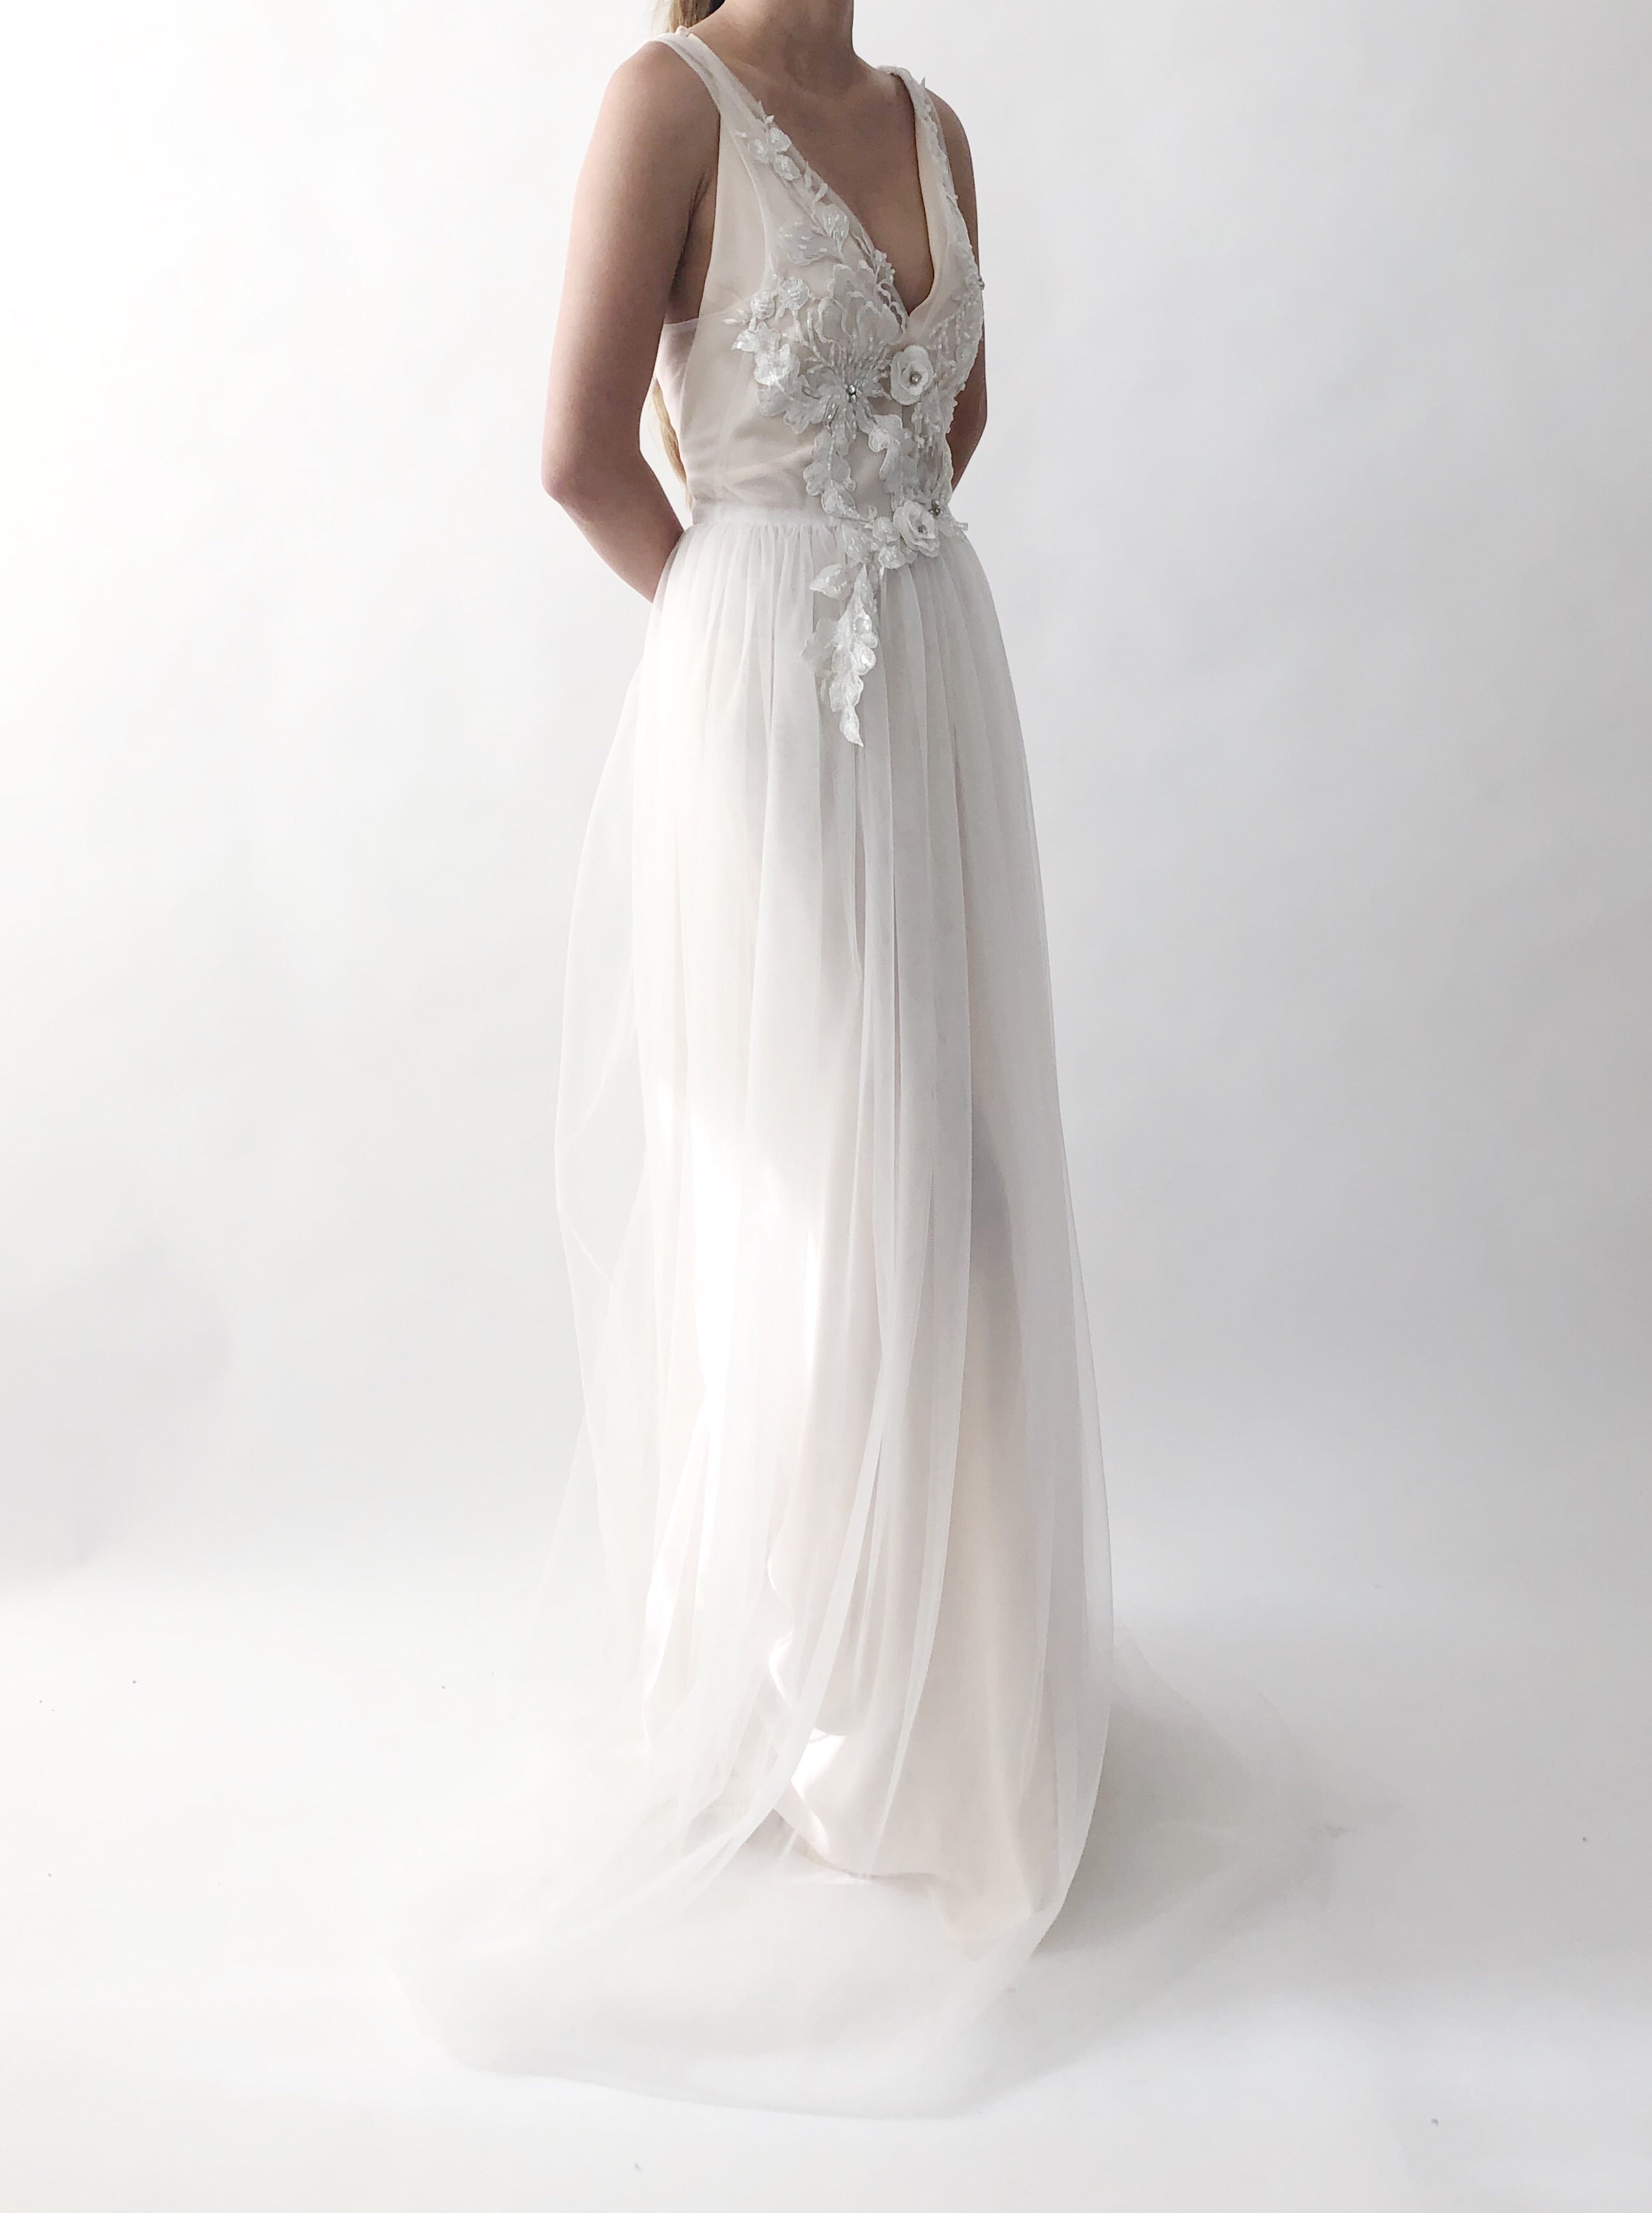 GOSSAMER Sheer Ivory Tulle Gown with Appliqué - 4/6